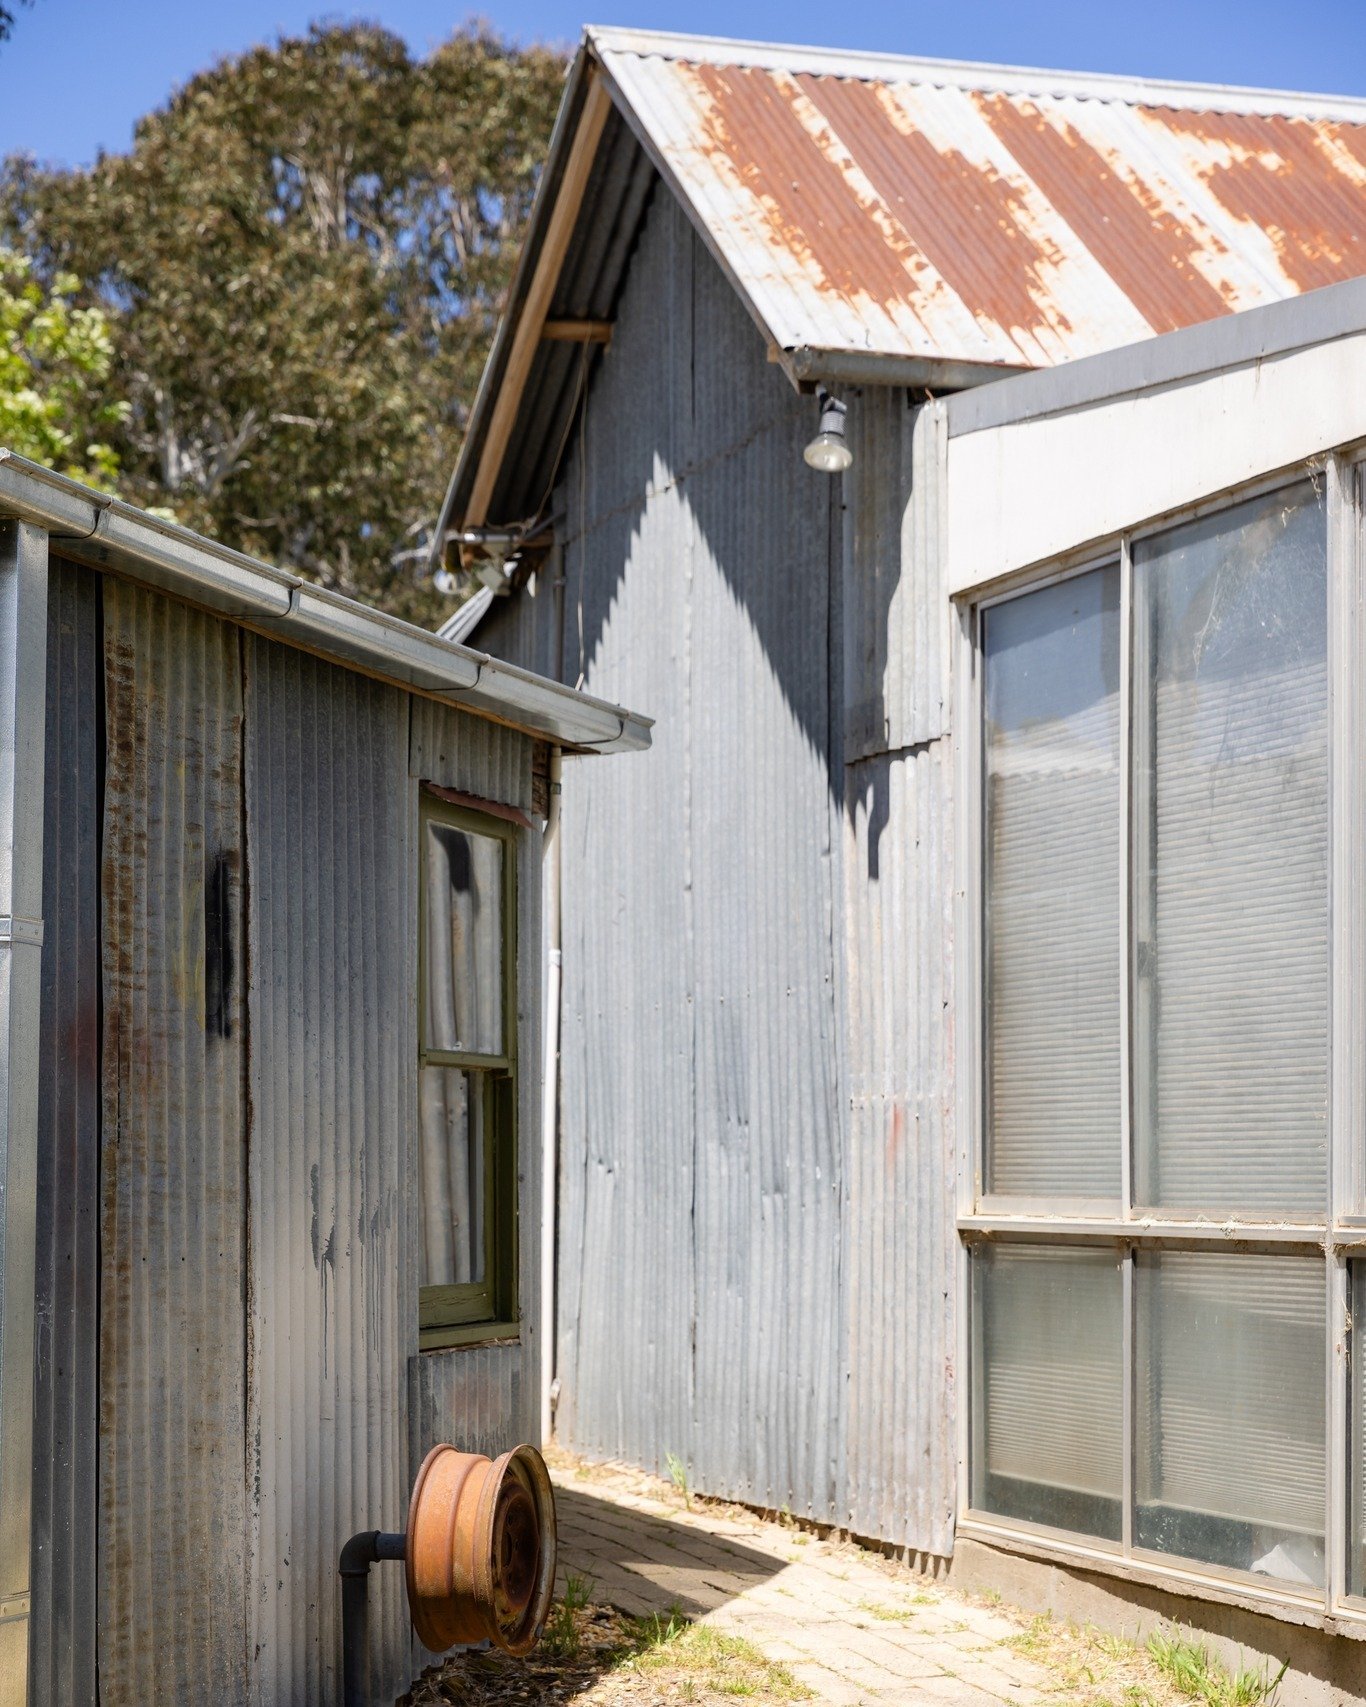 😍 Come for the corrugated iron, stay for the amazing studio location!

Calling all artists on the lookout for studio spaces - did you know Strathnairn Arts accepts applications all year round?

Strathnairn provides subsidised studio spaces for emerg